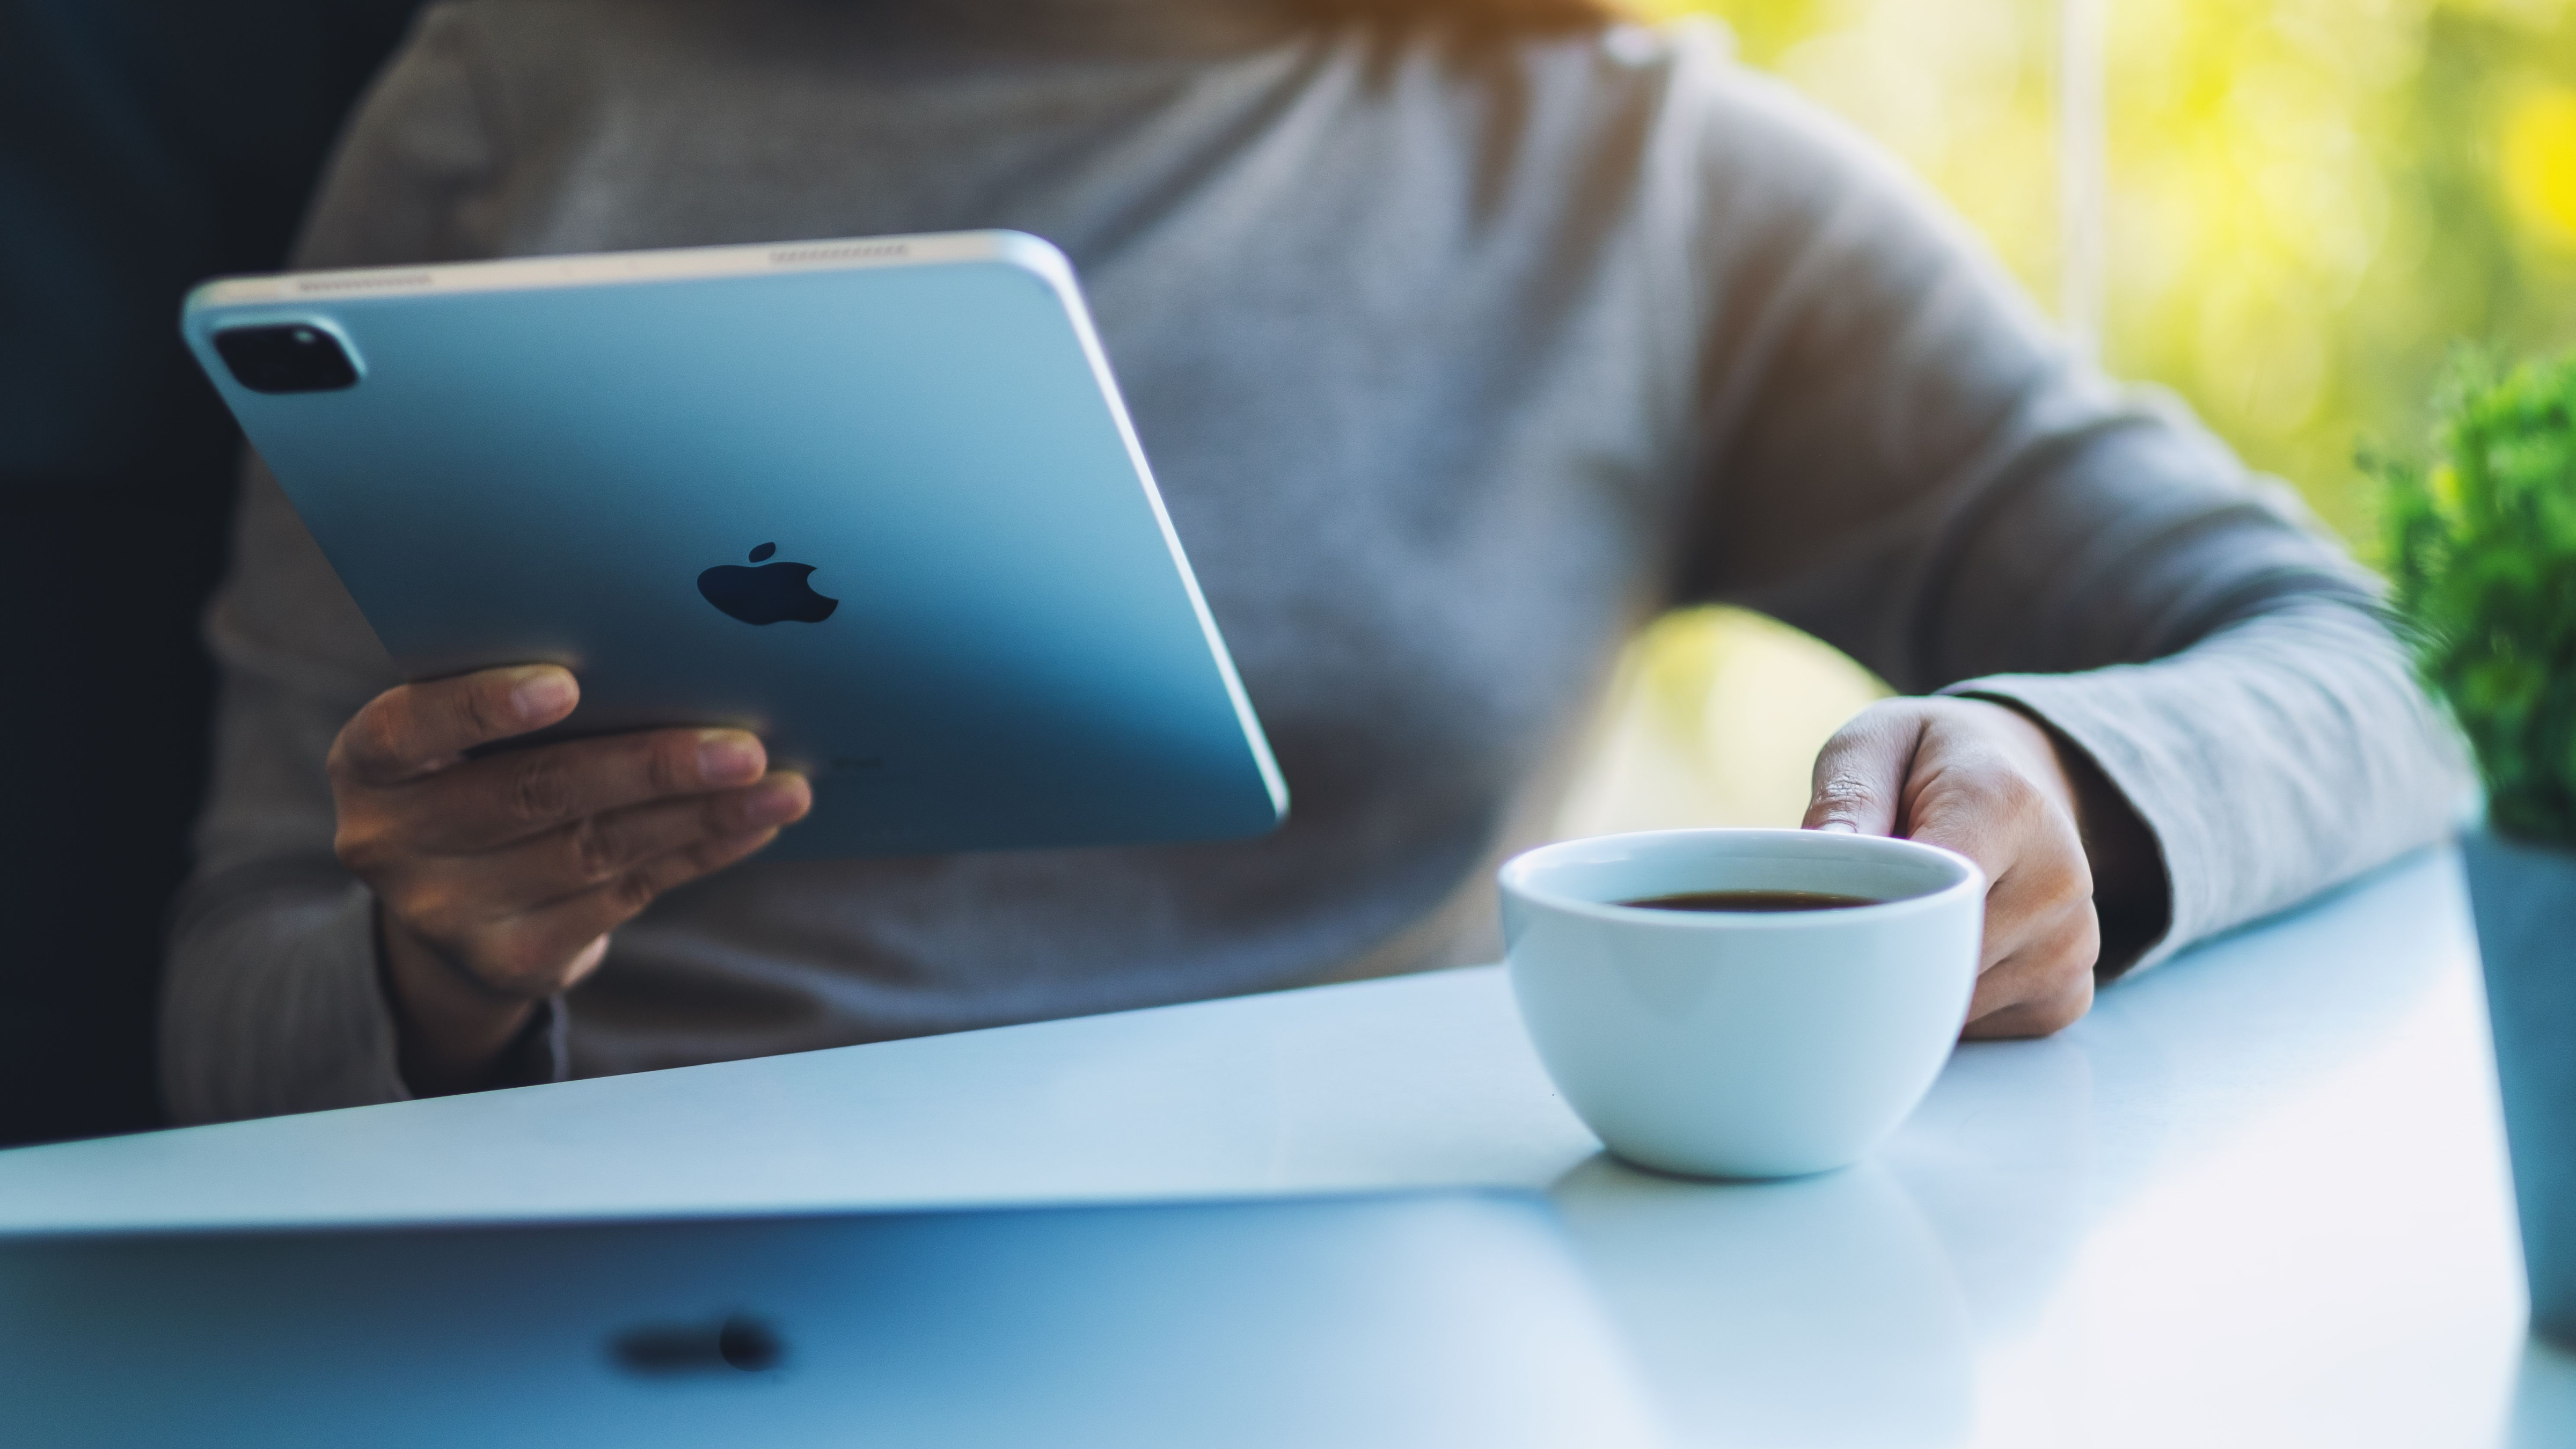 A woman holding and using Apple New Ipad Pro 2020 digital tablet with Apple MacBook Pro laptop computer while drinking coffee